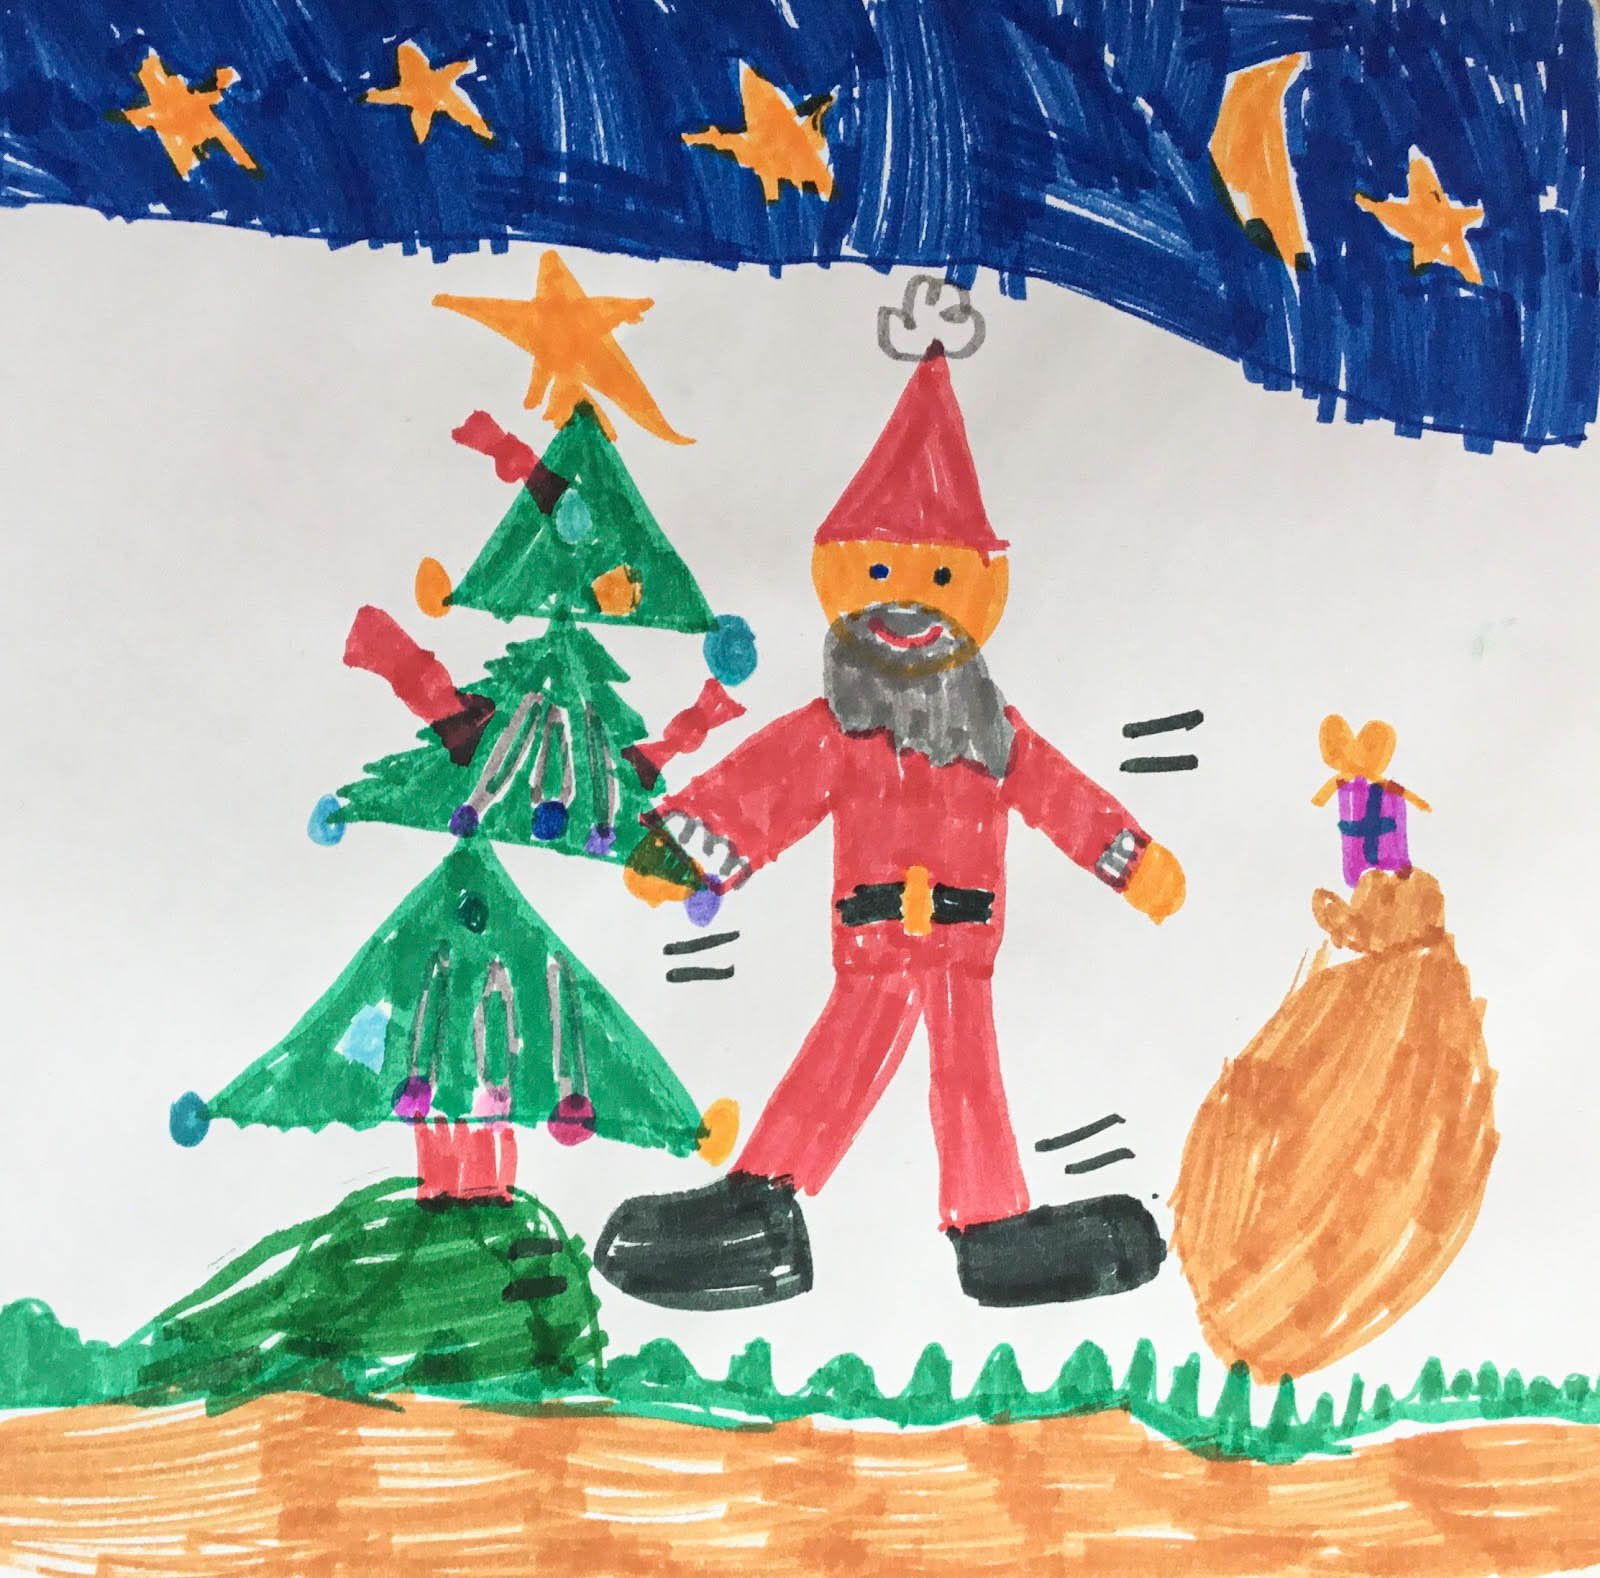 Artwork by Harriet, Age 6 from Fredericton